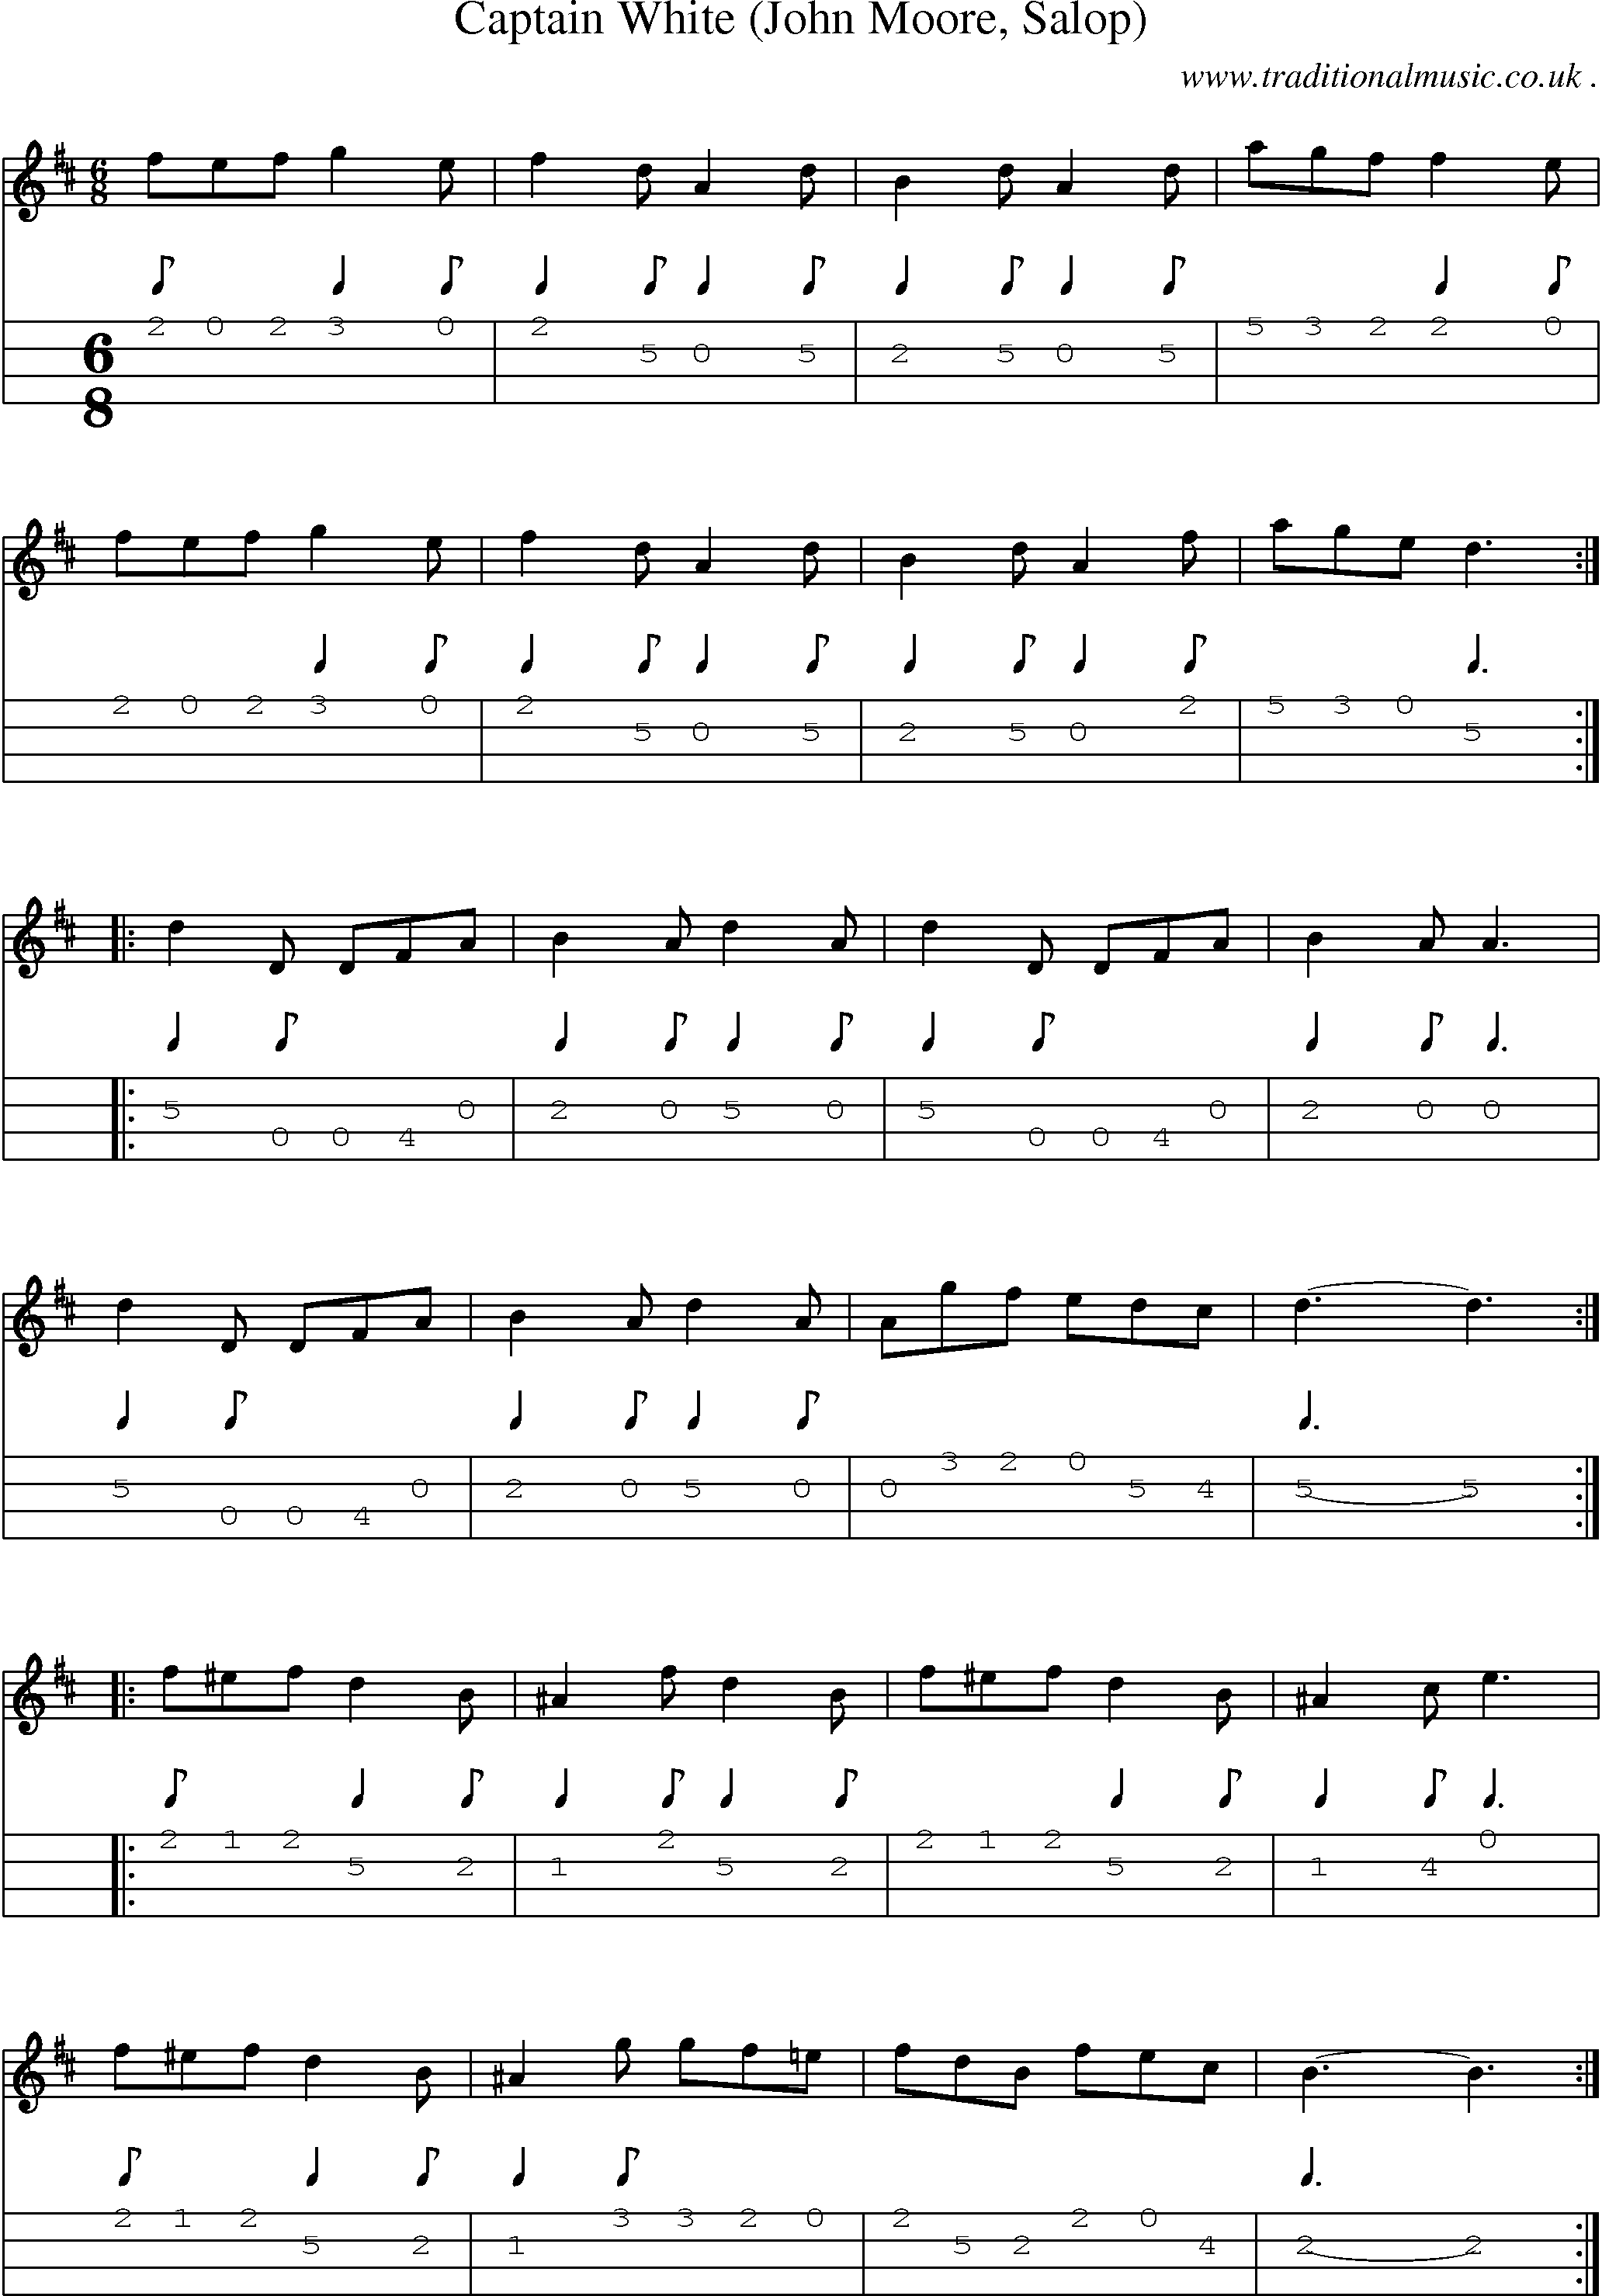 Sheet-Music and Mandolin Tabs for Captain White (john Moore Salop)